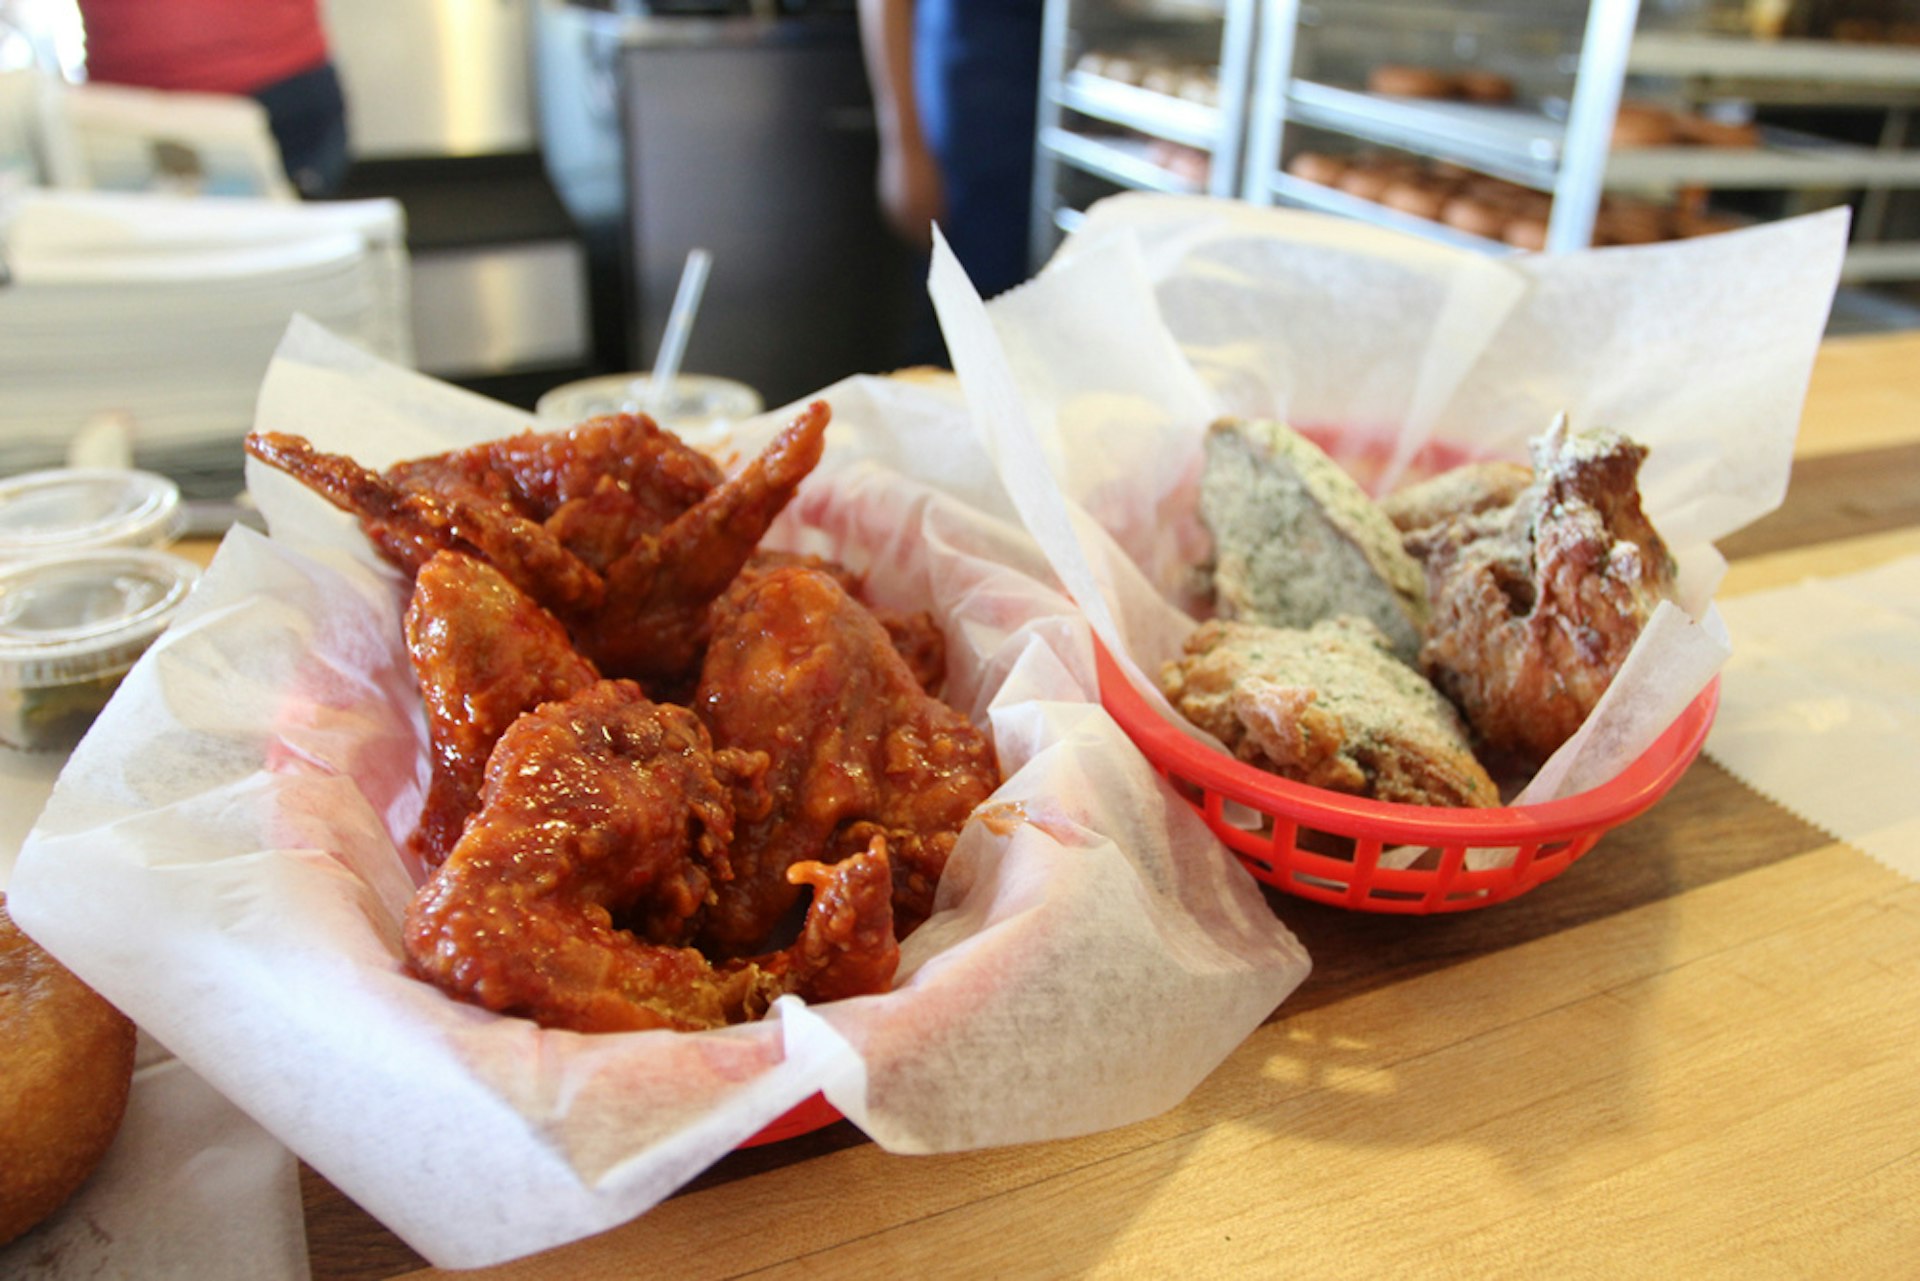 Korean-style chicken at Federal Donuts. Photo by viviandnguyen_ / CC BY-SA 2.0